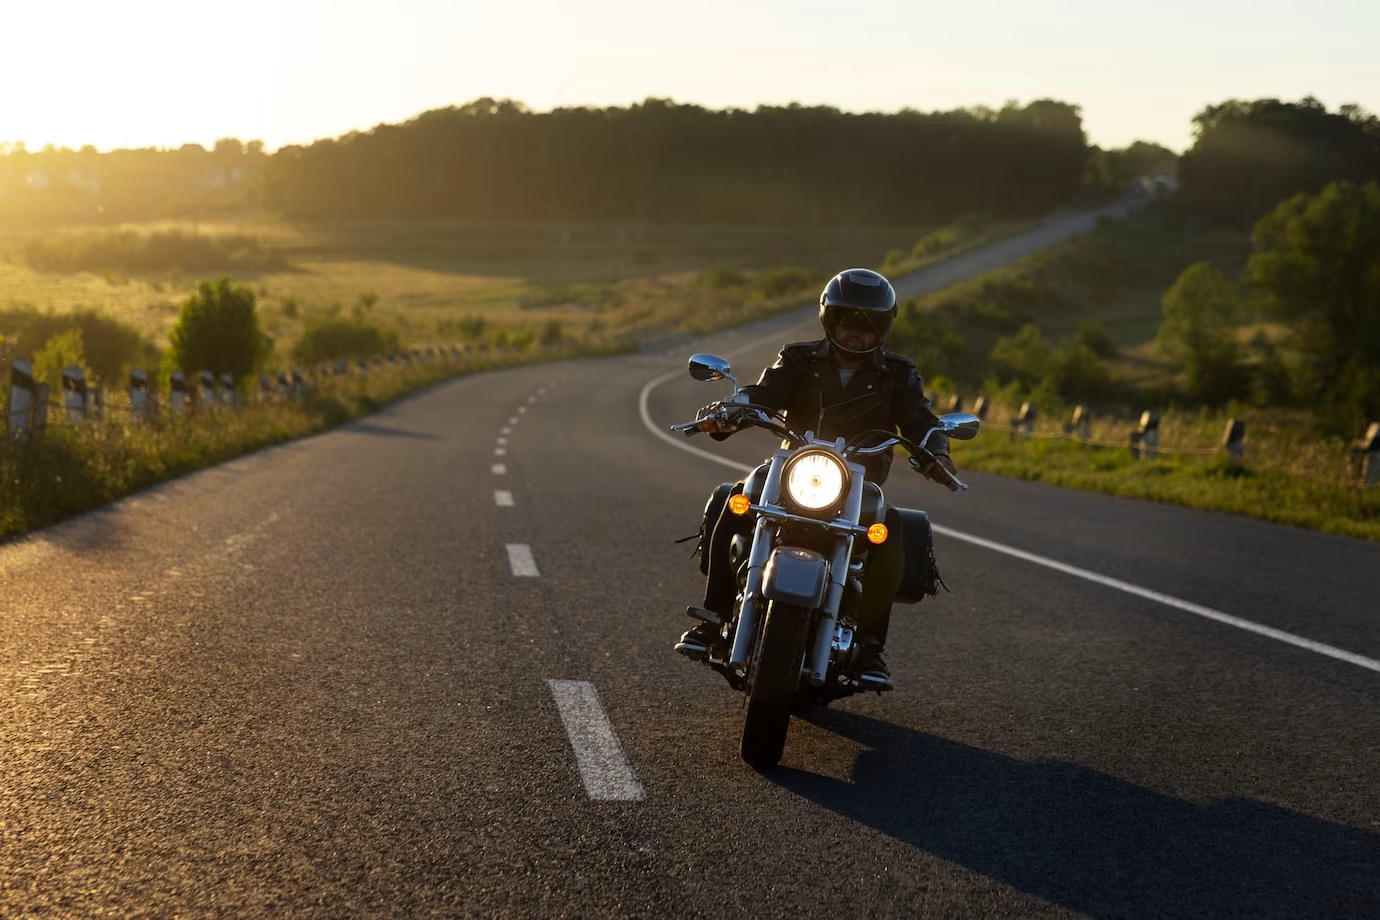 As the weather warms up, motorcycle travel requires goggles to protect your eyes